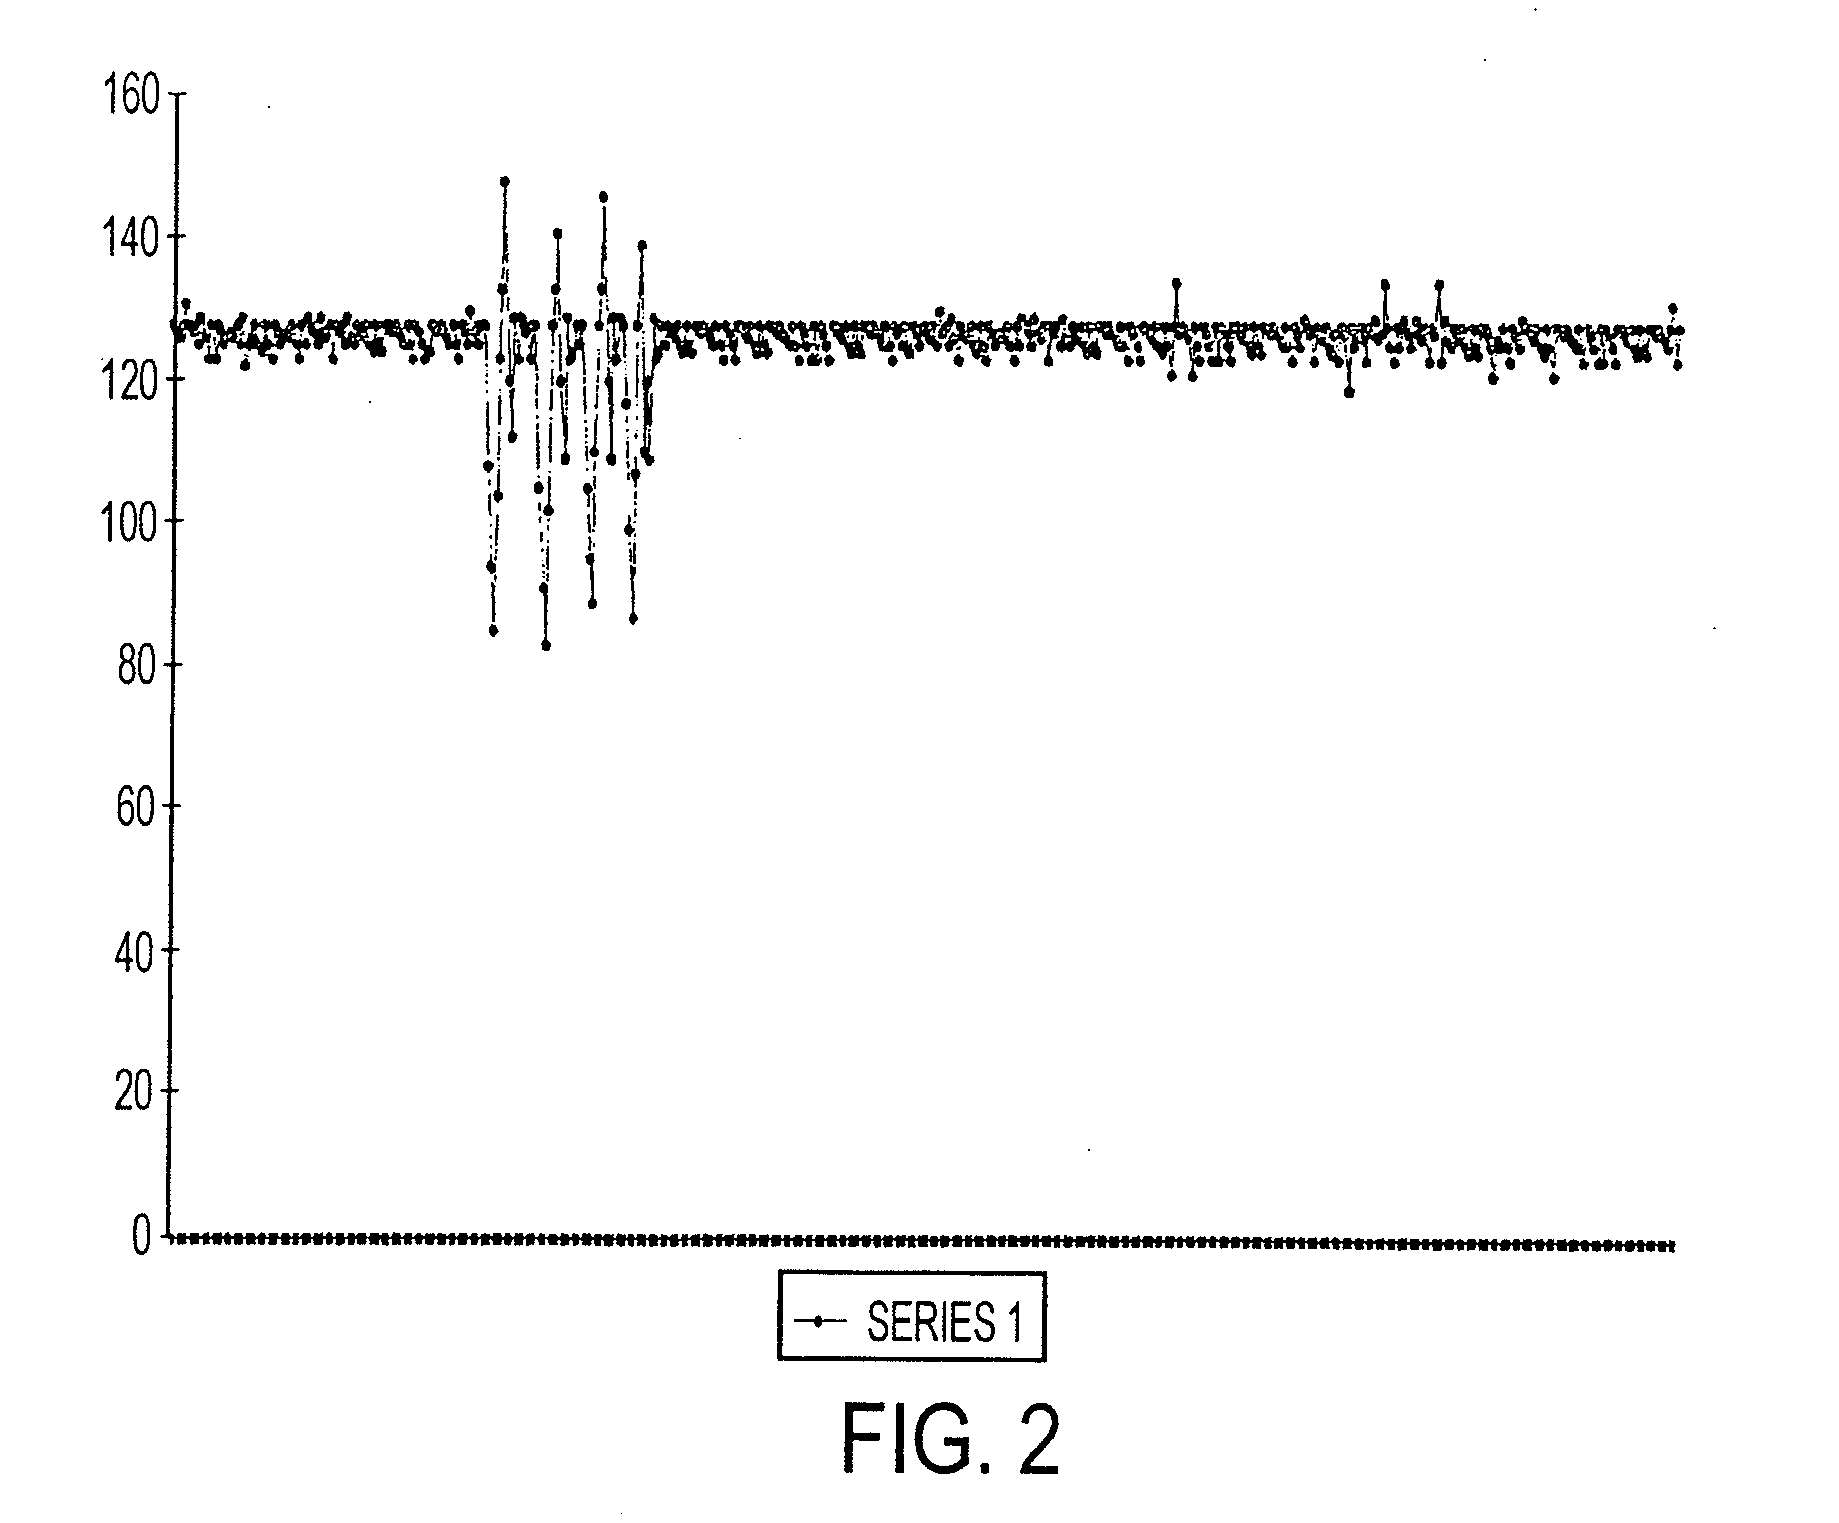 Apparatus and method for wireless autonomous infant mobility detection, monitoring, analysis and alarm event generation